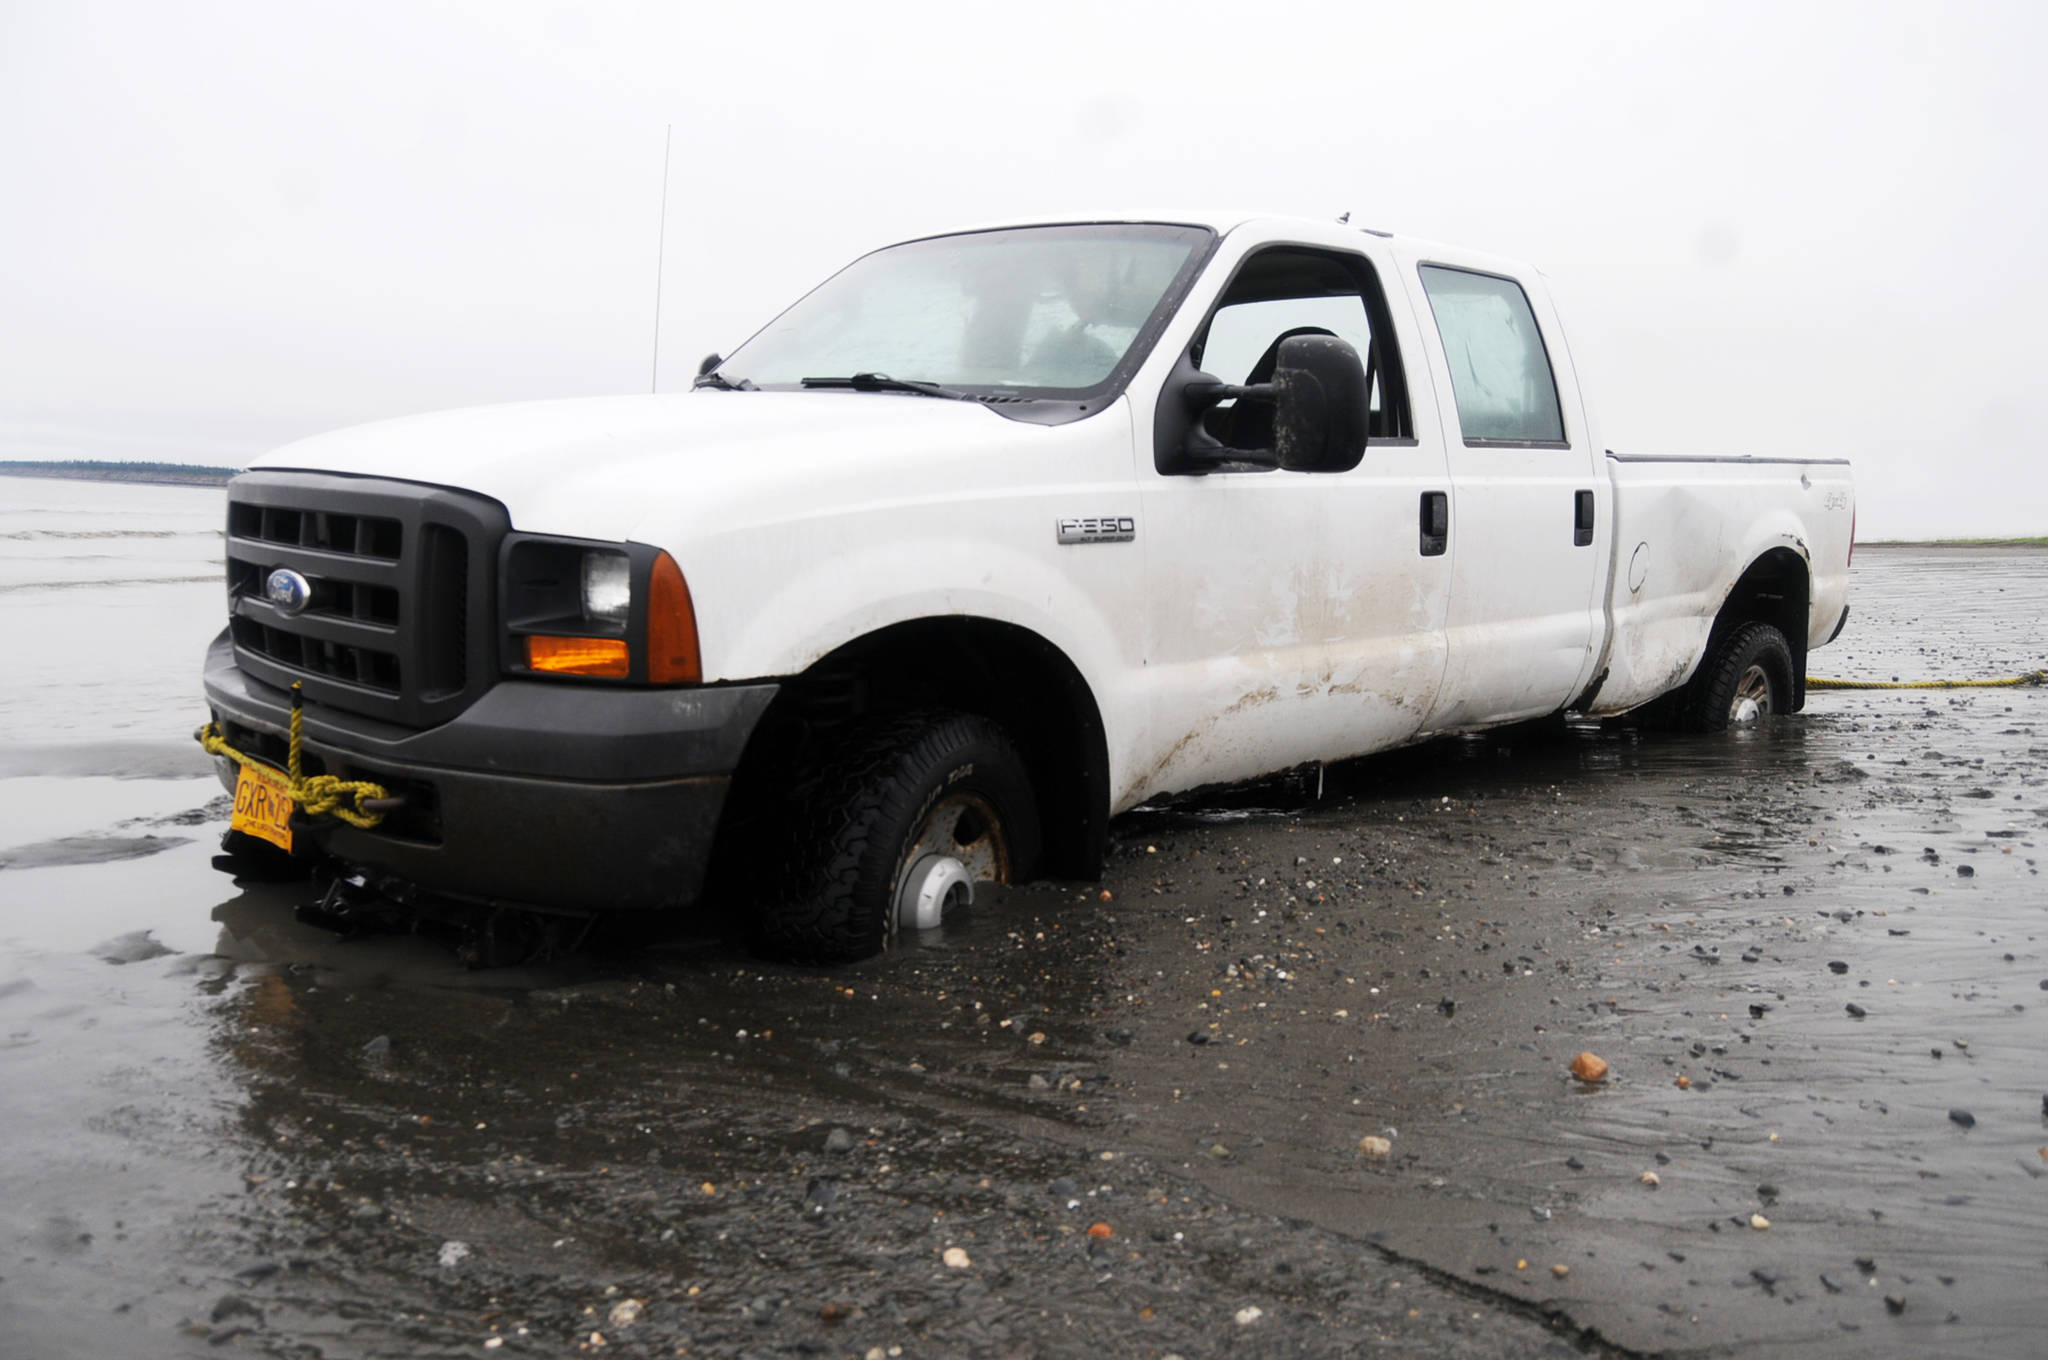 The muddy sand of the south Kenai beach traps Armin Schmidt’s pickup truck on Thursday, July 27, 2017 in Kenai, Alaska. Schmidt, a commercial set gillnet fisherman, was driving the truck Wednesday when it sank into the spongy mud in the intertidal area of the south Kenai beach near the jersey barrier designating the legal personal-use dipnet area. He was working with the city of Kenai’s Parks and Recreation Department, which coordinates the dipnet, to get it it out Thursday. No one was hurt in the incident. (Photo by Elizabeth Earl/Peninsula Clarion)